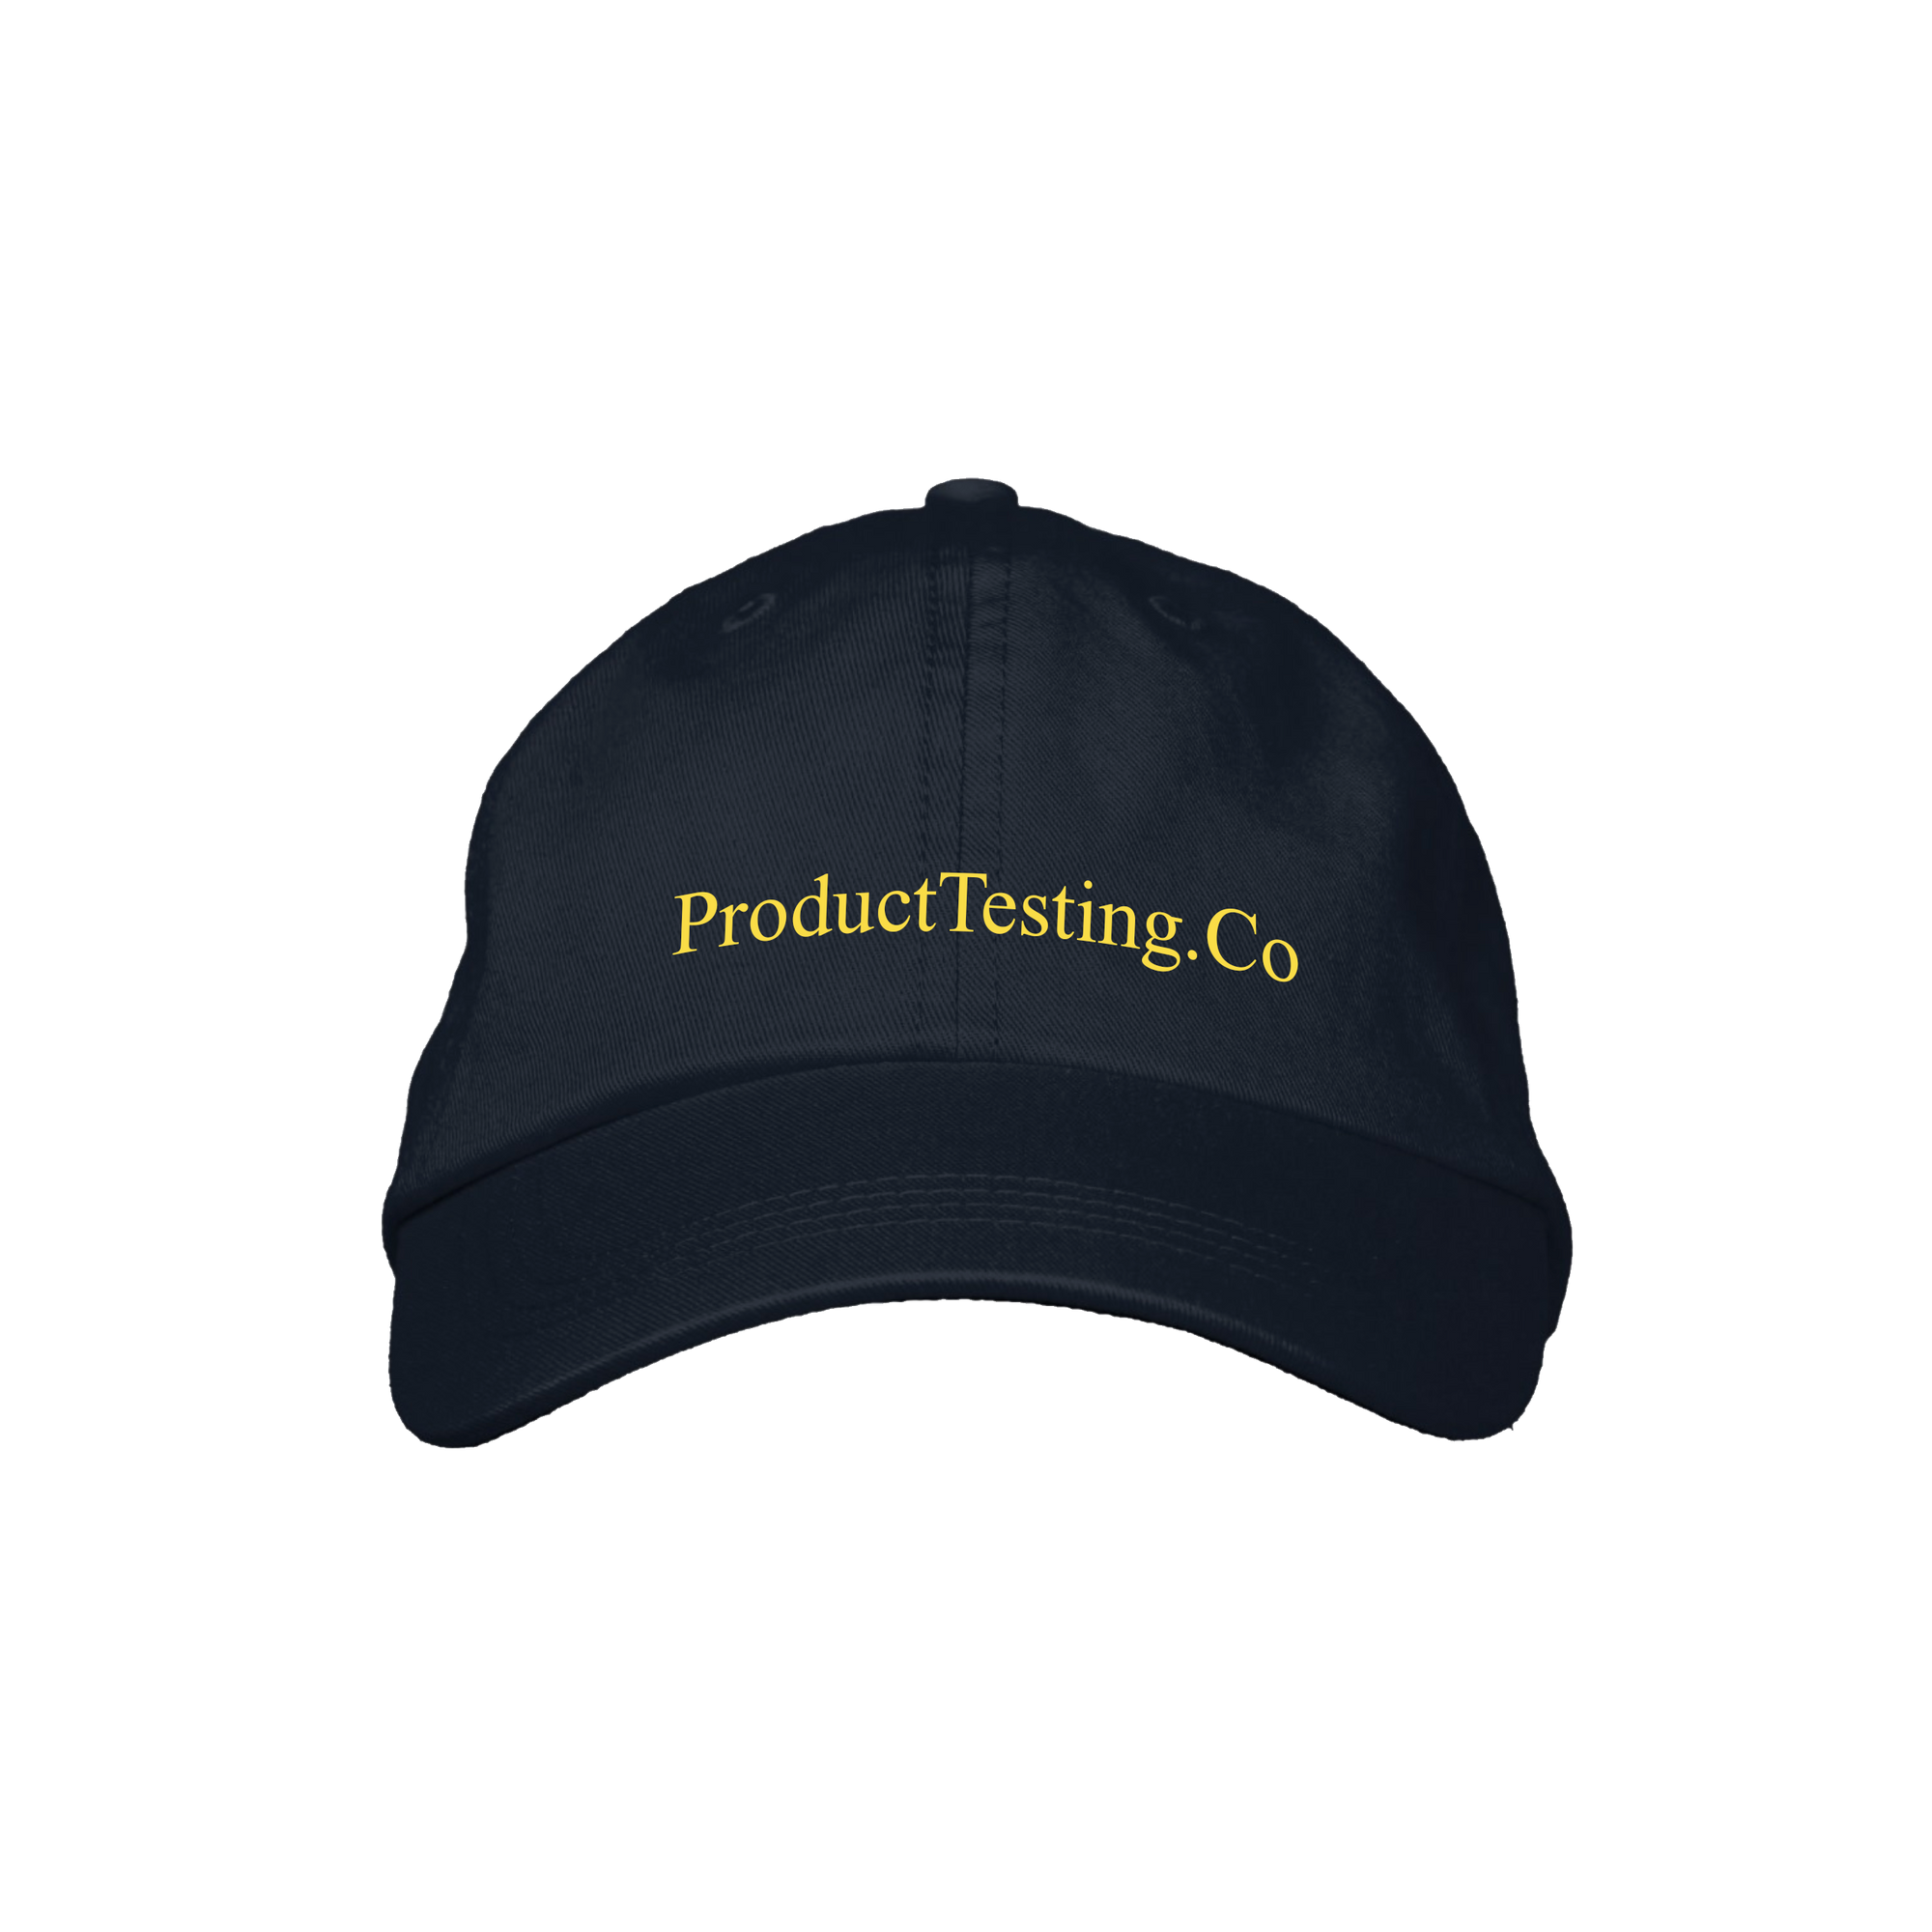 ProductTesting.co